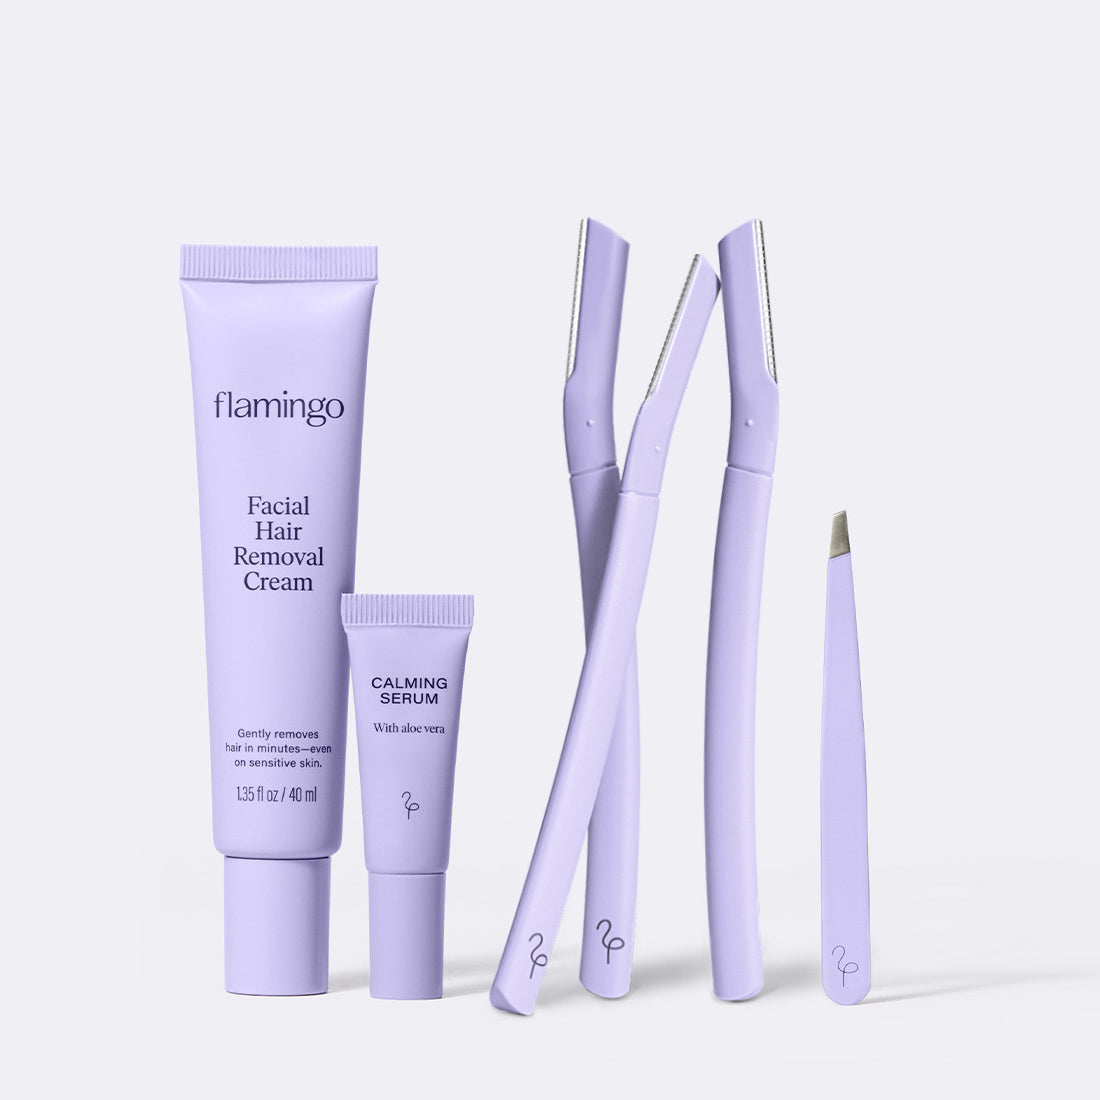 Flamingo Full Face Trio featuring Facial Hair Removal Cream, calming serum, three Disposable Dermaplane Razors, and lilac colored tweezers all displayed side by side